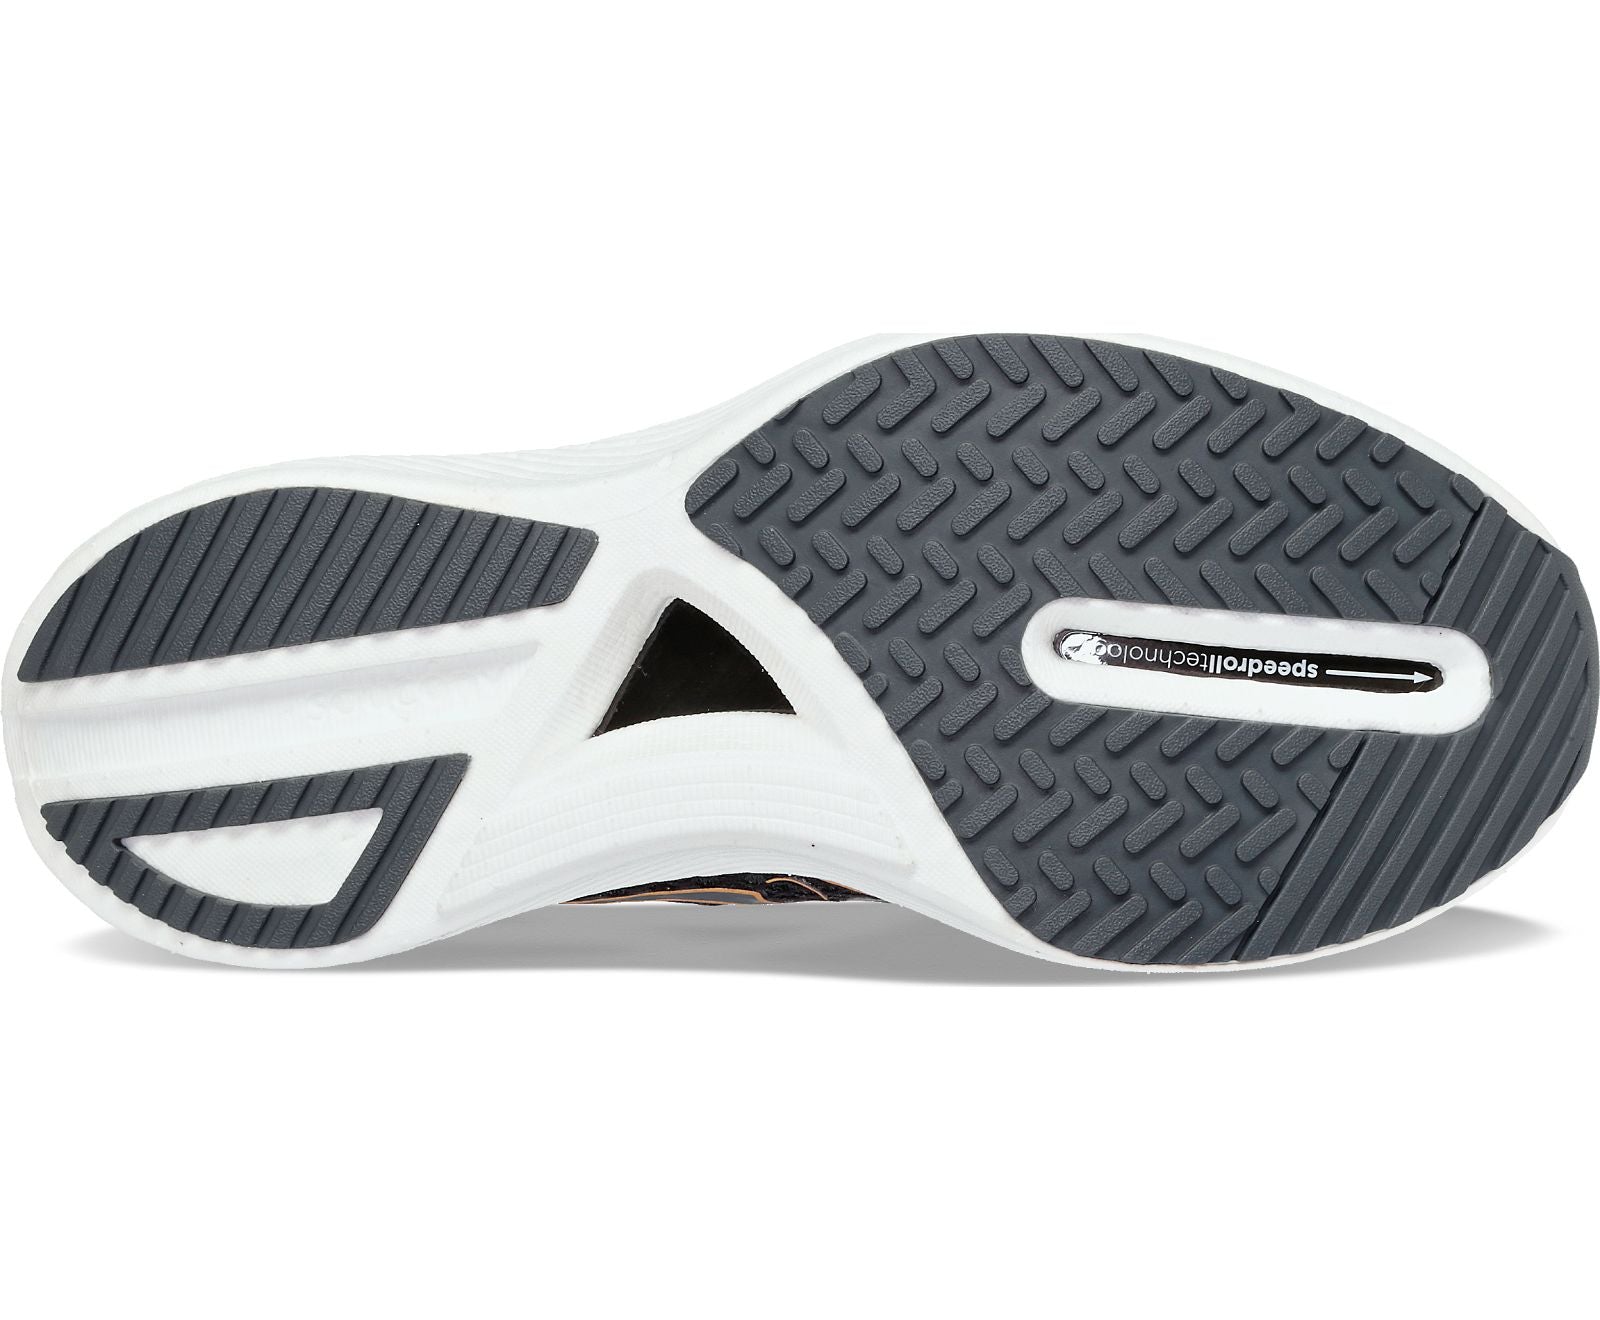 Bottom (outer sole) view of the Women's Endorphin Pro 3 by Saucony in the color Black/Goldstruck